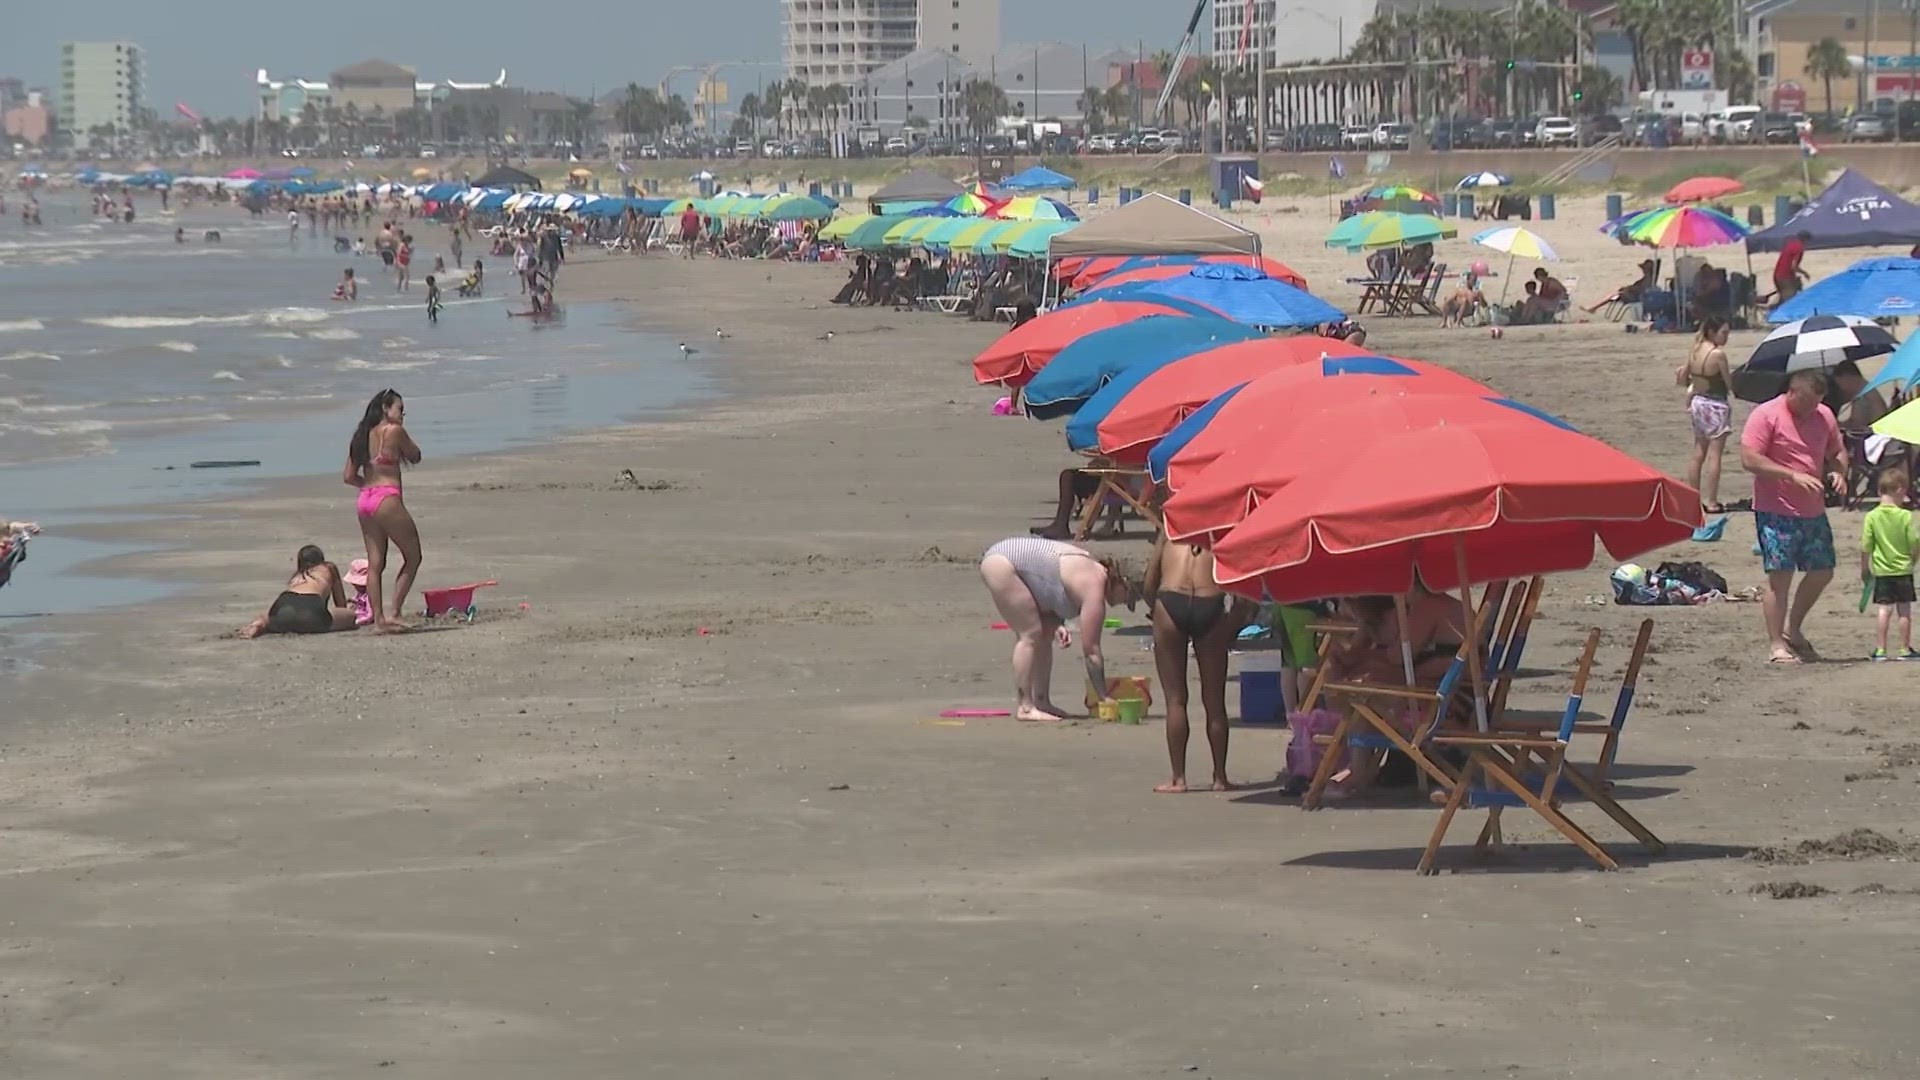 Galveston city officials want you to be careful out there, both in the water and under the sun.